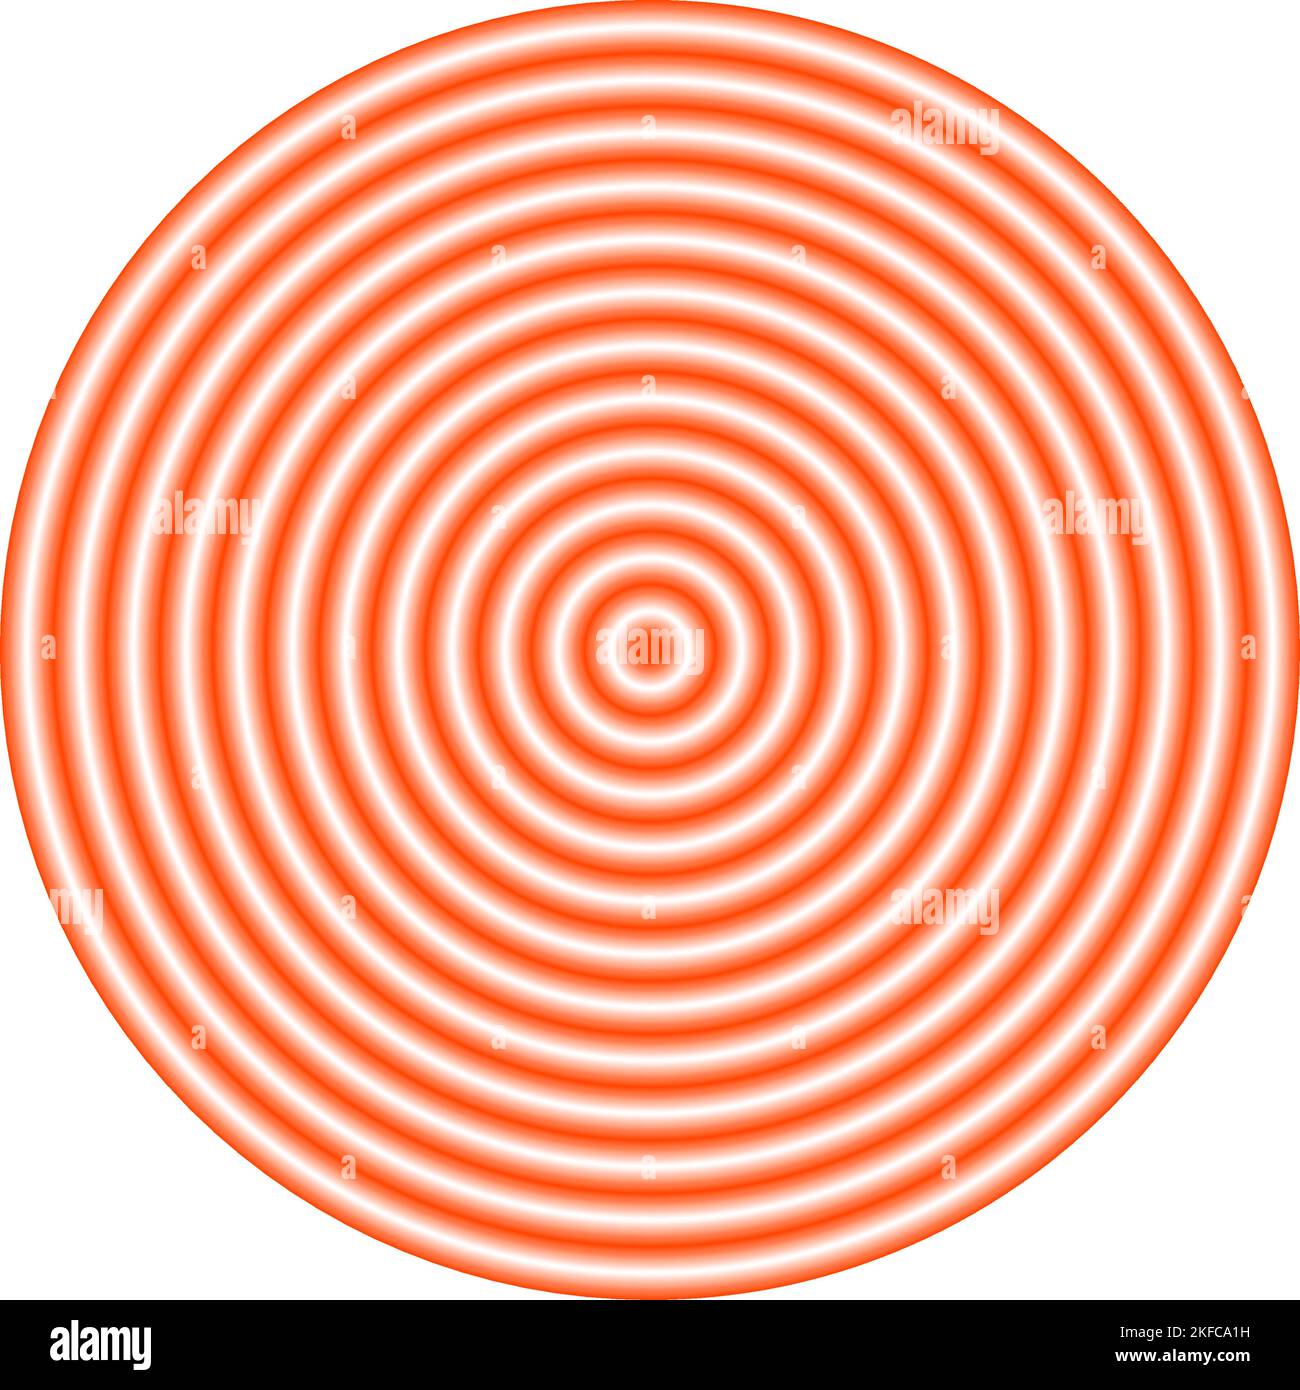 Red concentric ripple circles. Sonar or sound wave rings. Epicentre, target, radar concept. Radial signal or vibration element Stock Vector